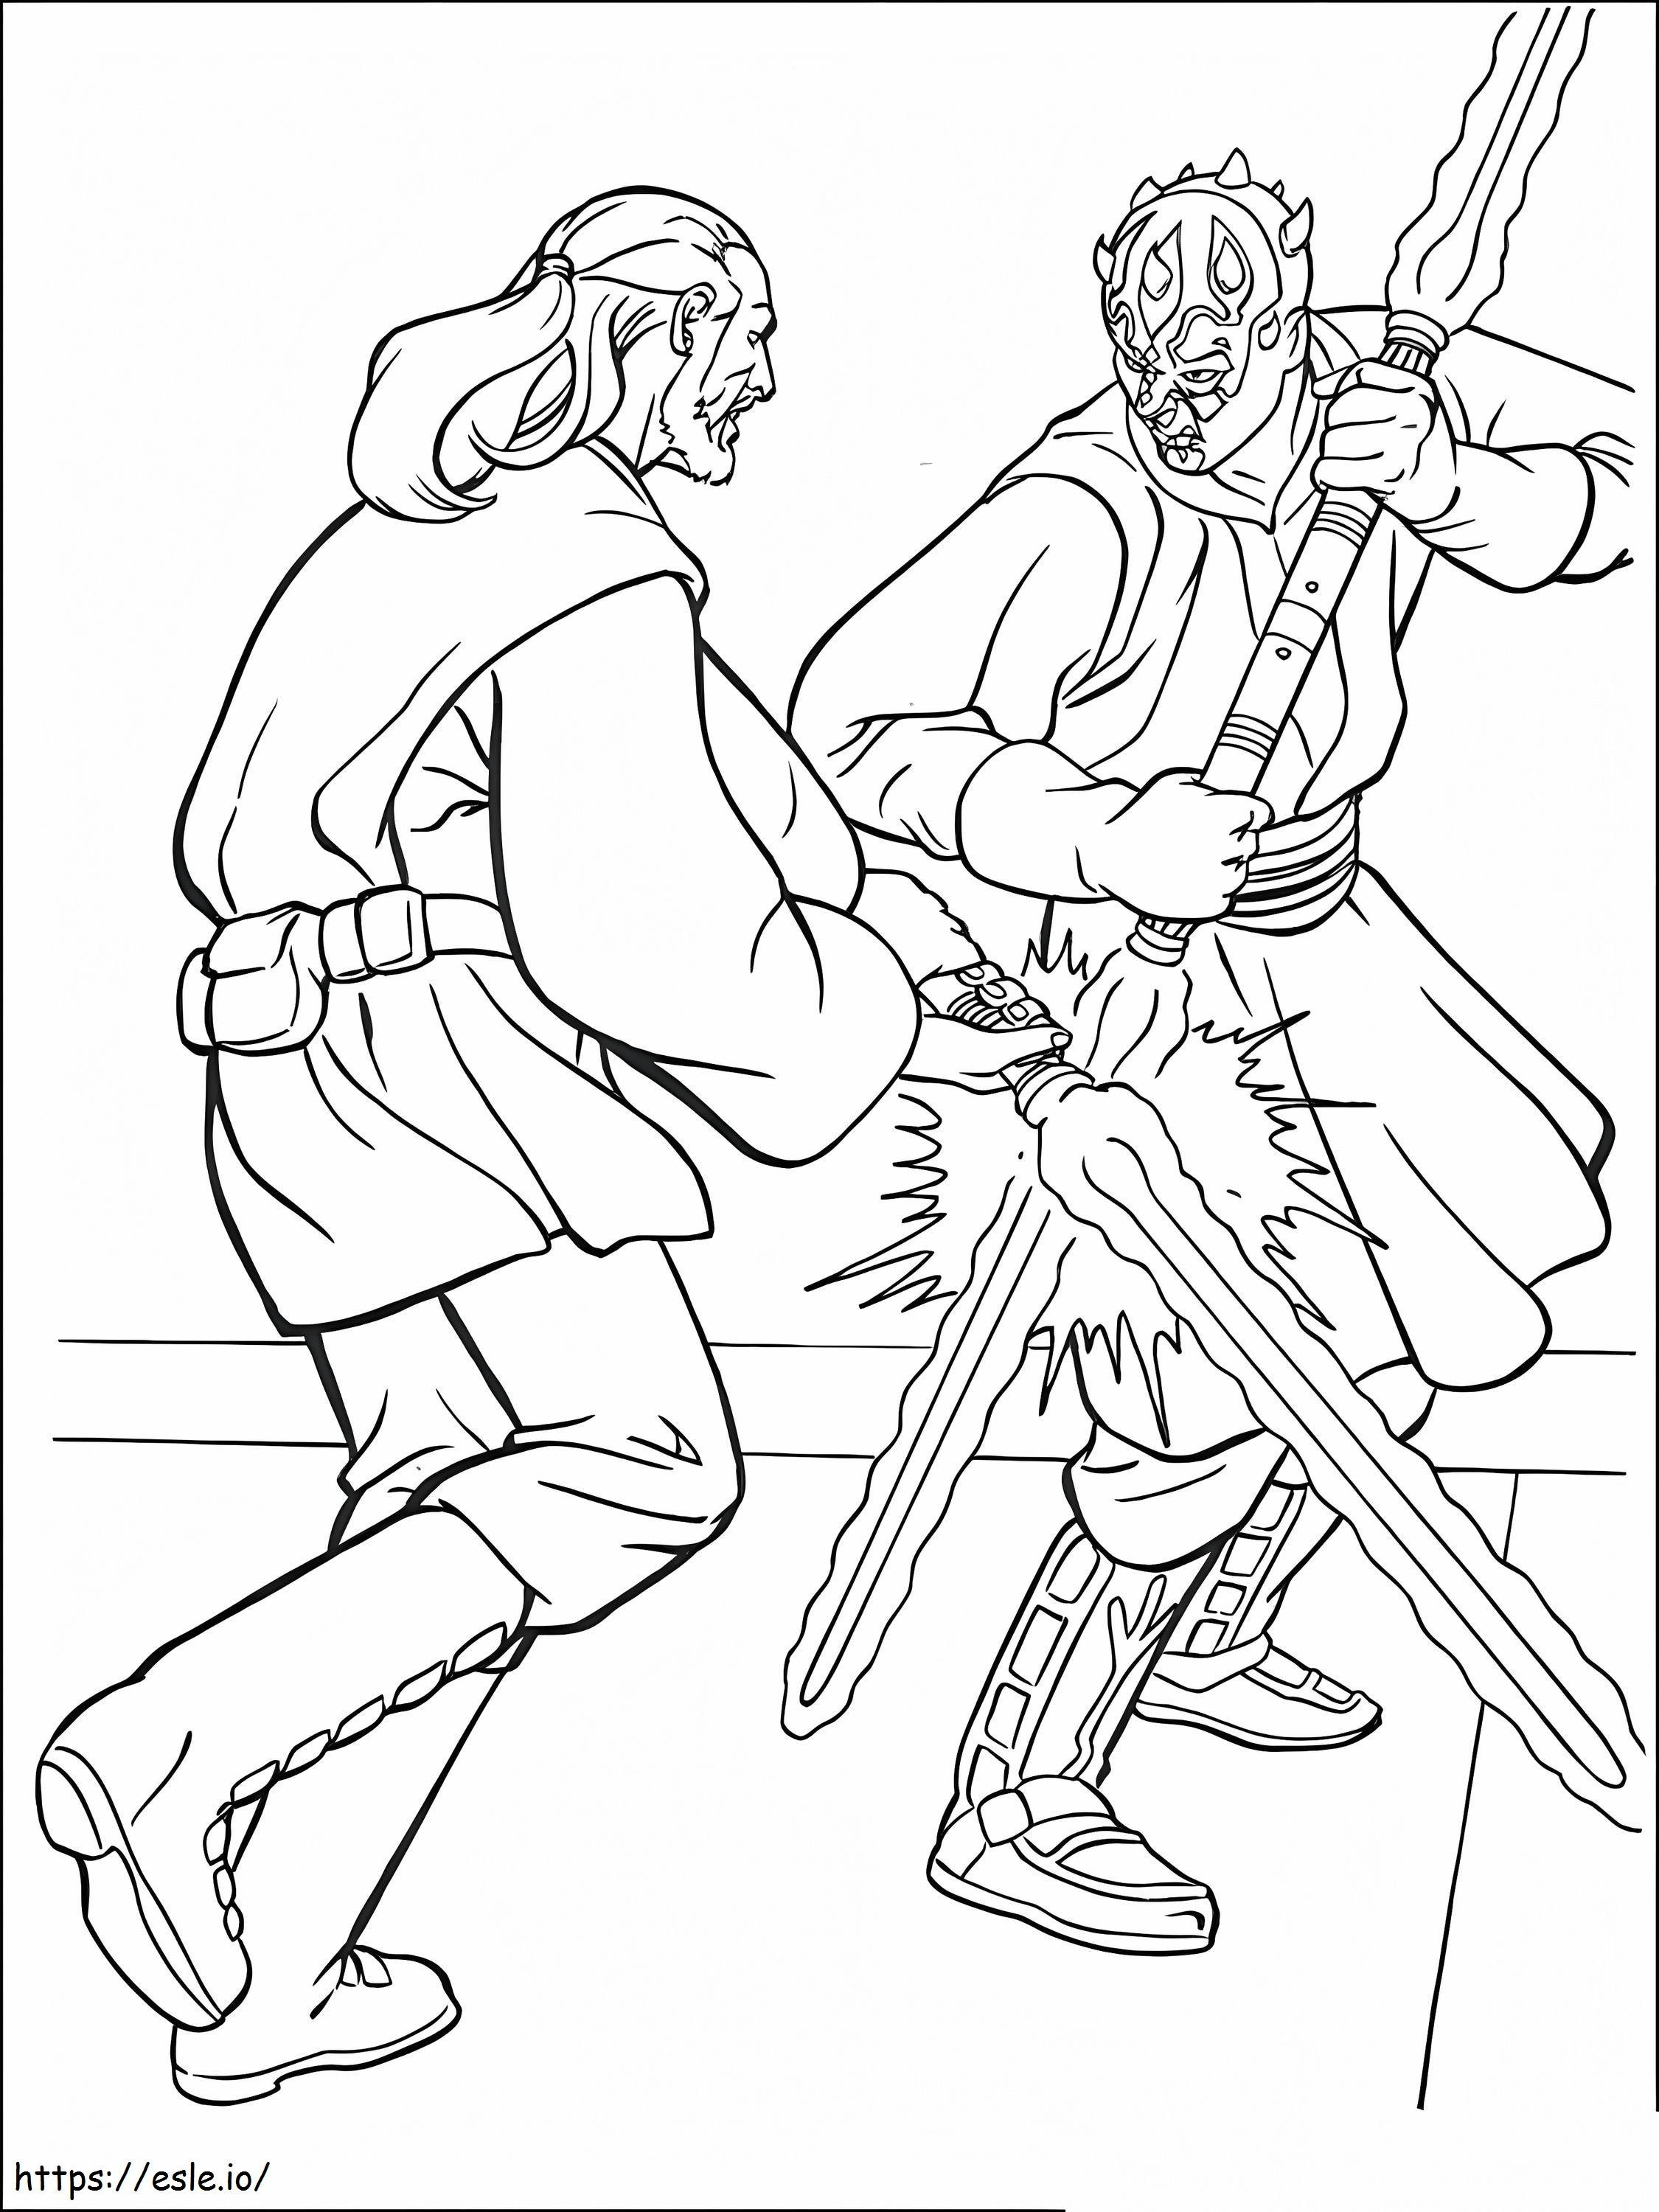 Star Wars 4 coloring page